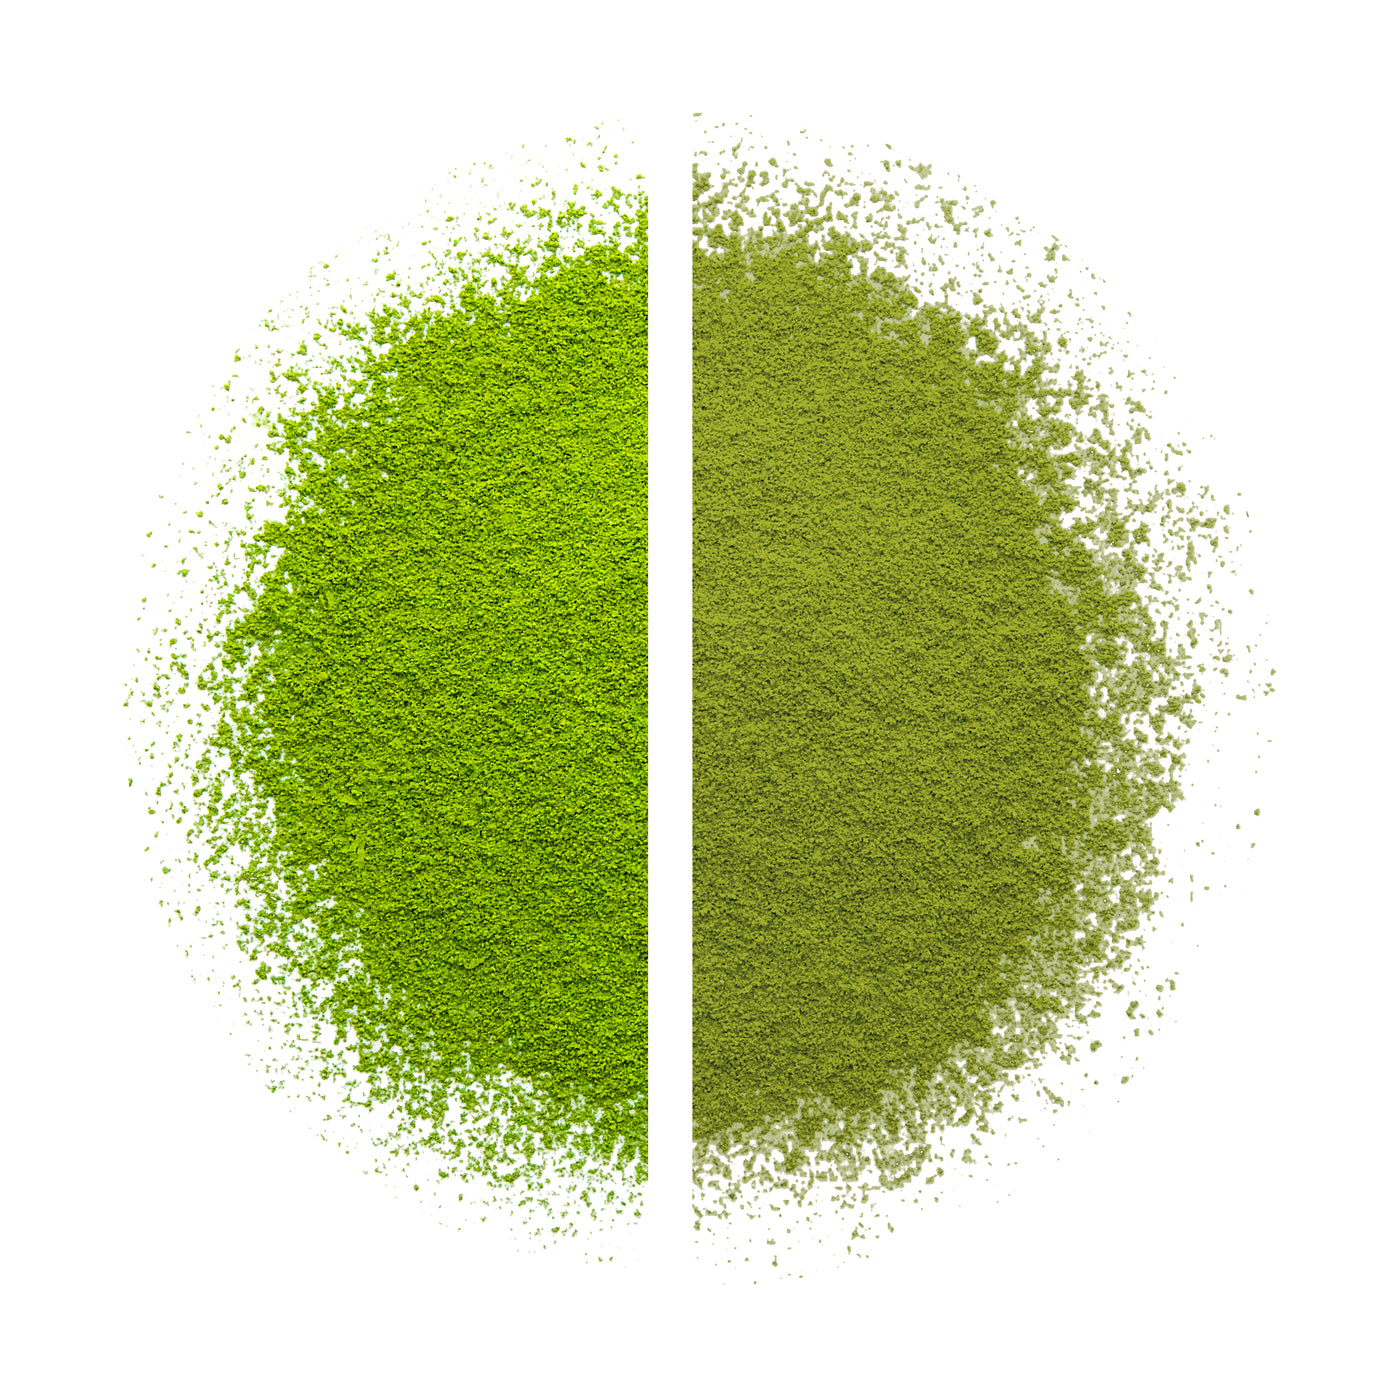 Close-up comparison of high-quality and low-quality matcha powder textures